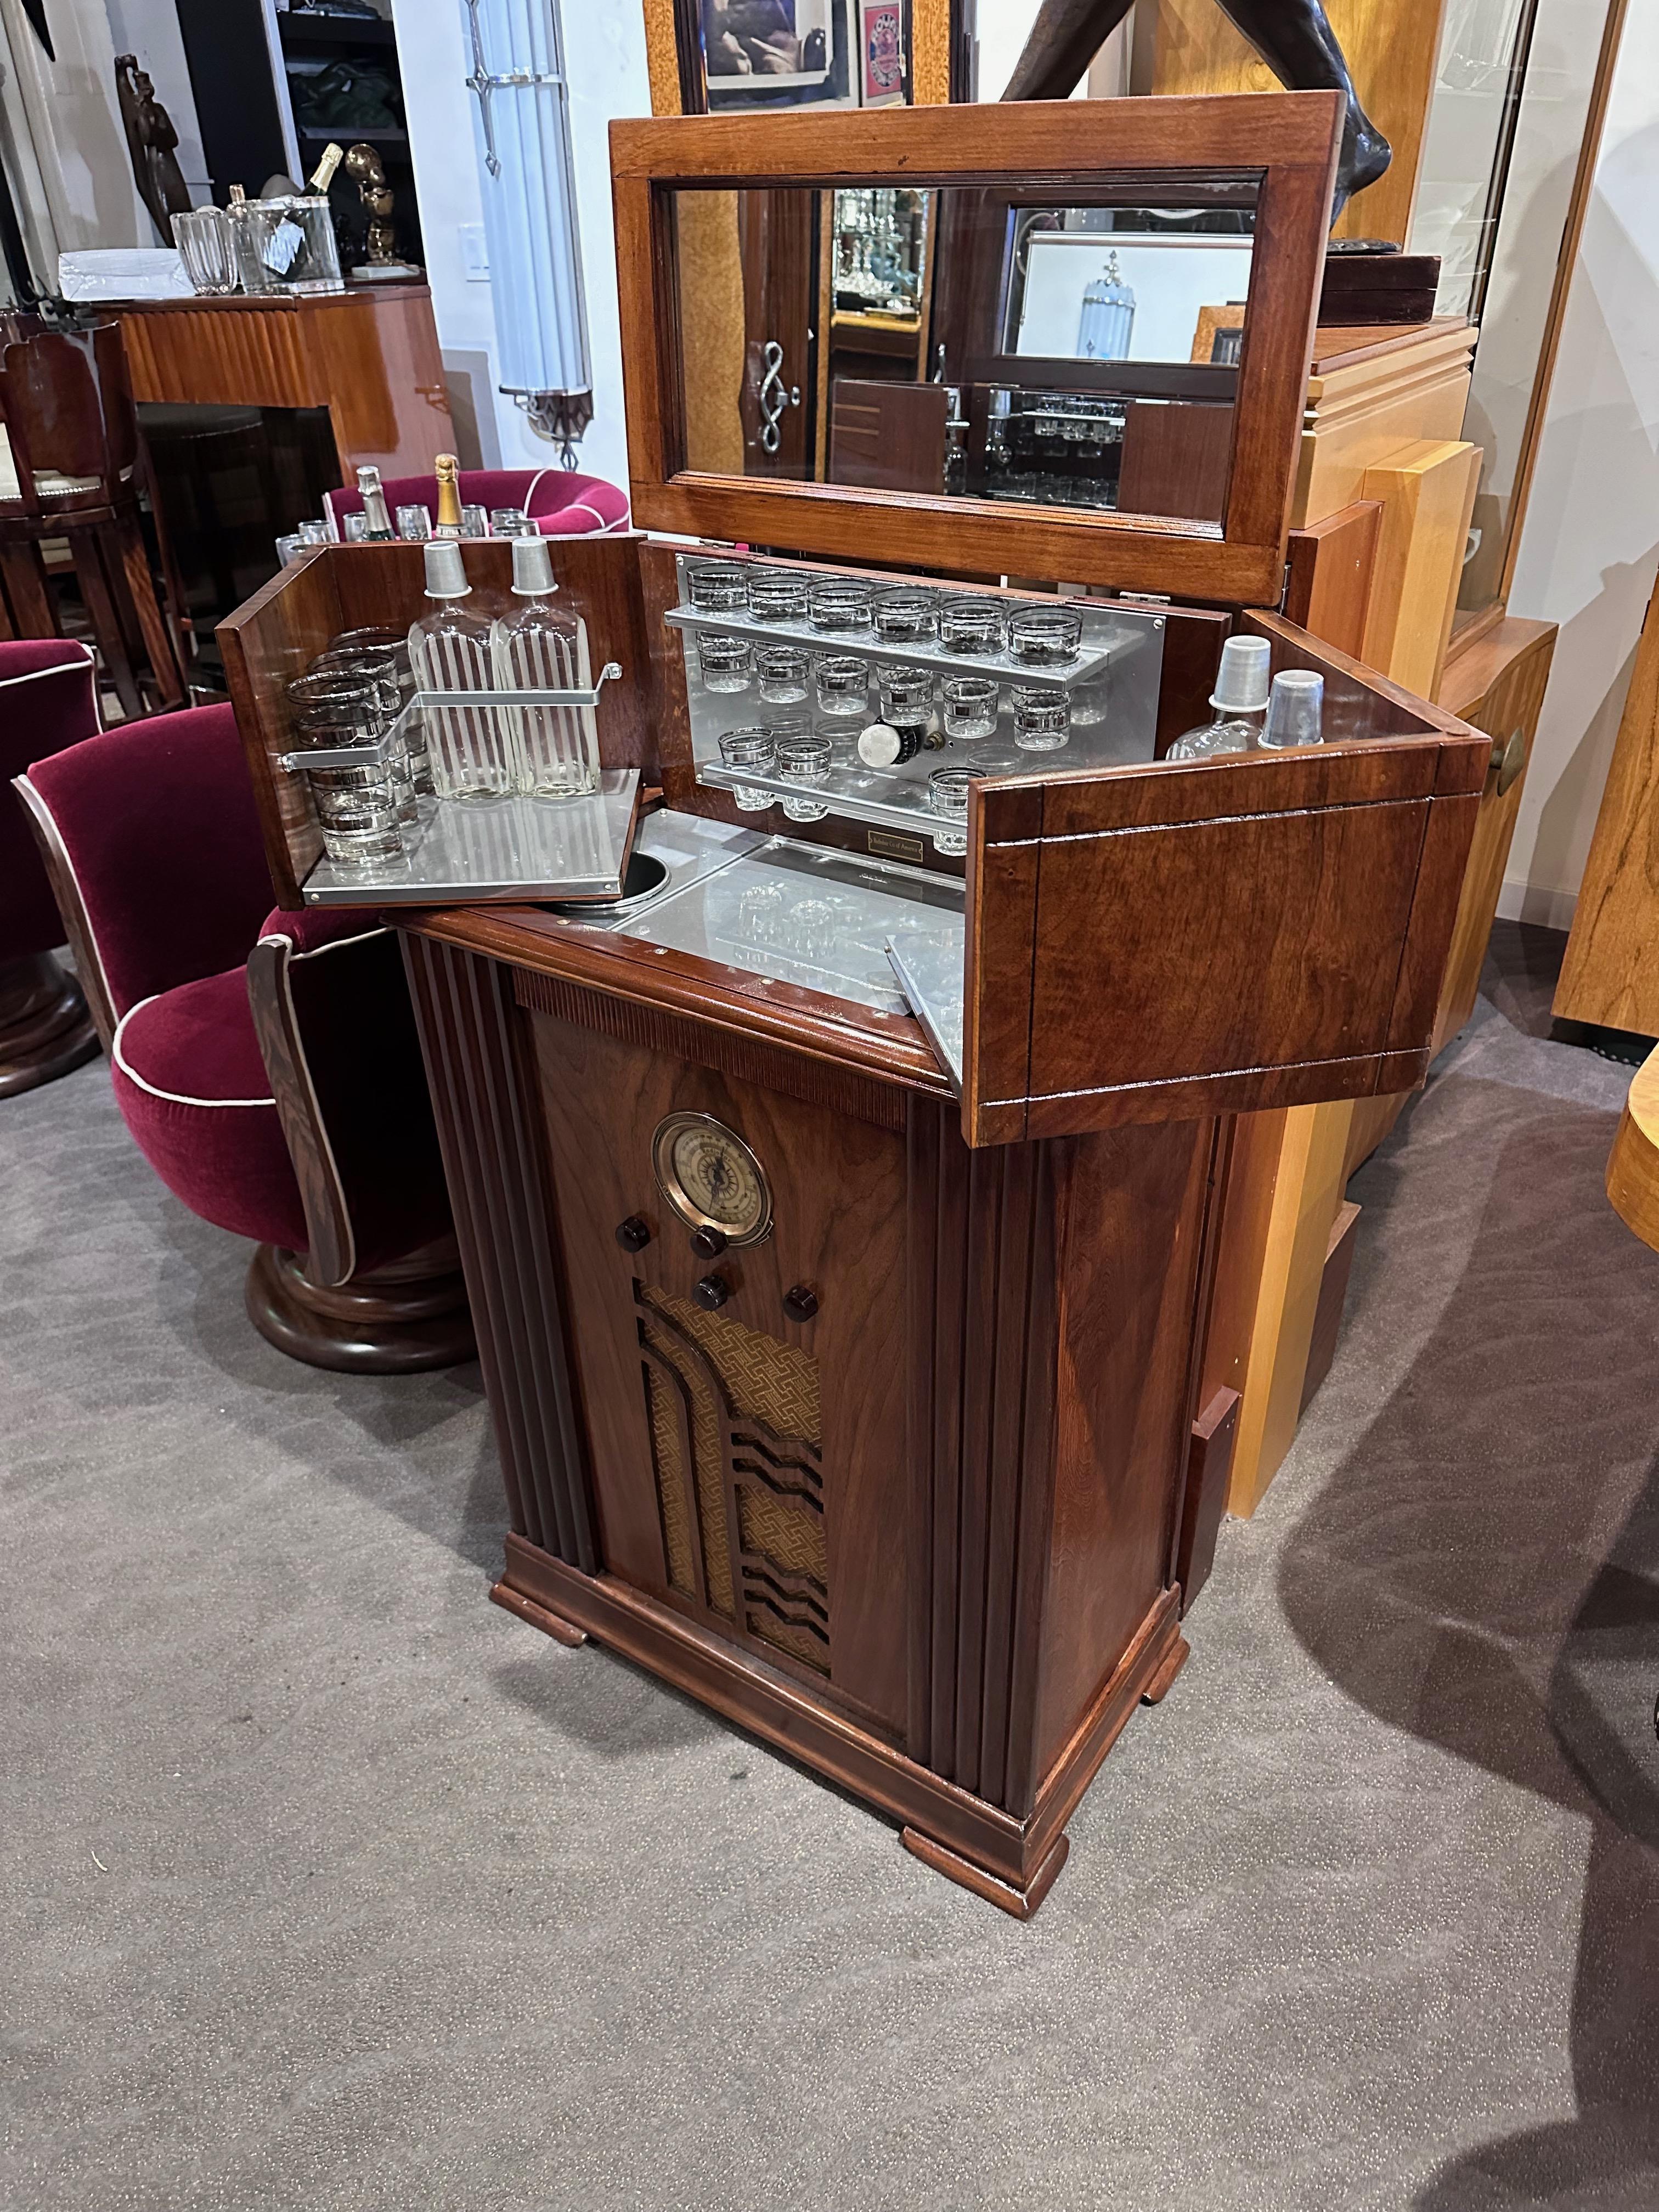 RCA Radiobar 1935 Bluetooth Rare Early Model Restored. This unique early model is different than the typical Philco radiobars, which we also have specialized in selling over the years. This model uses an RCA radio, not a Philco radio. This was the